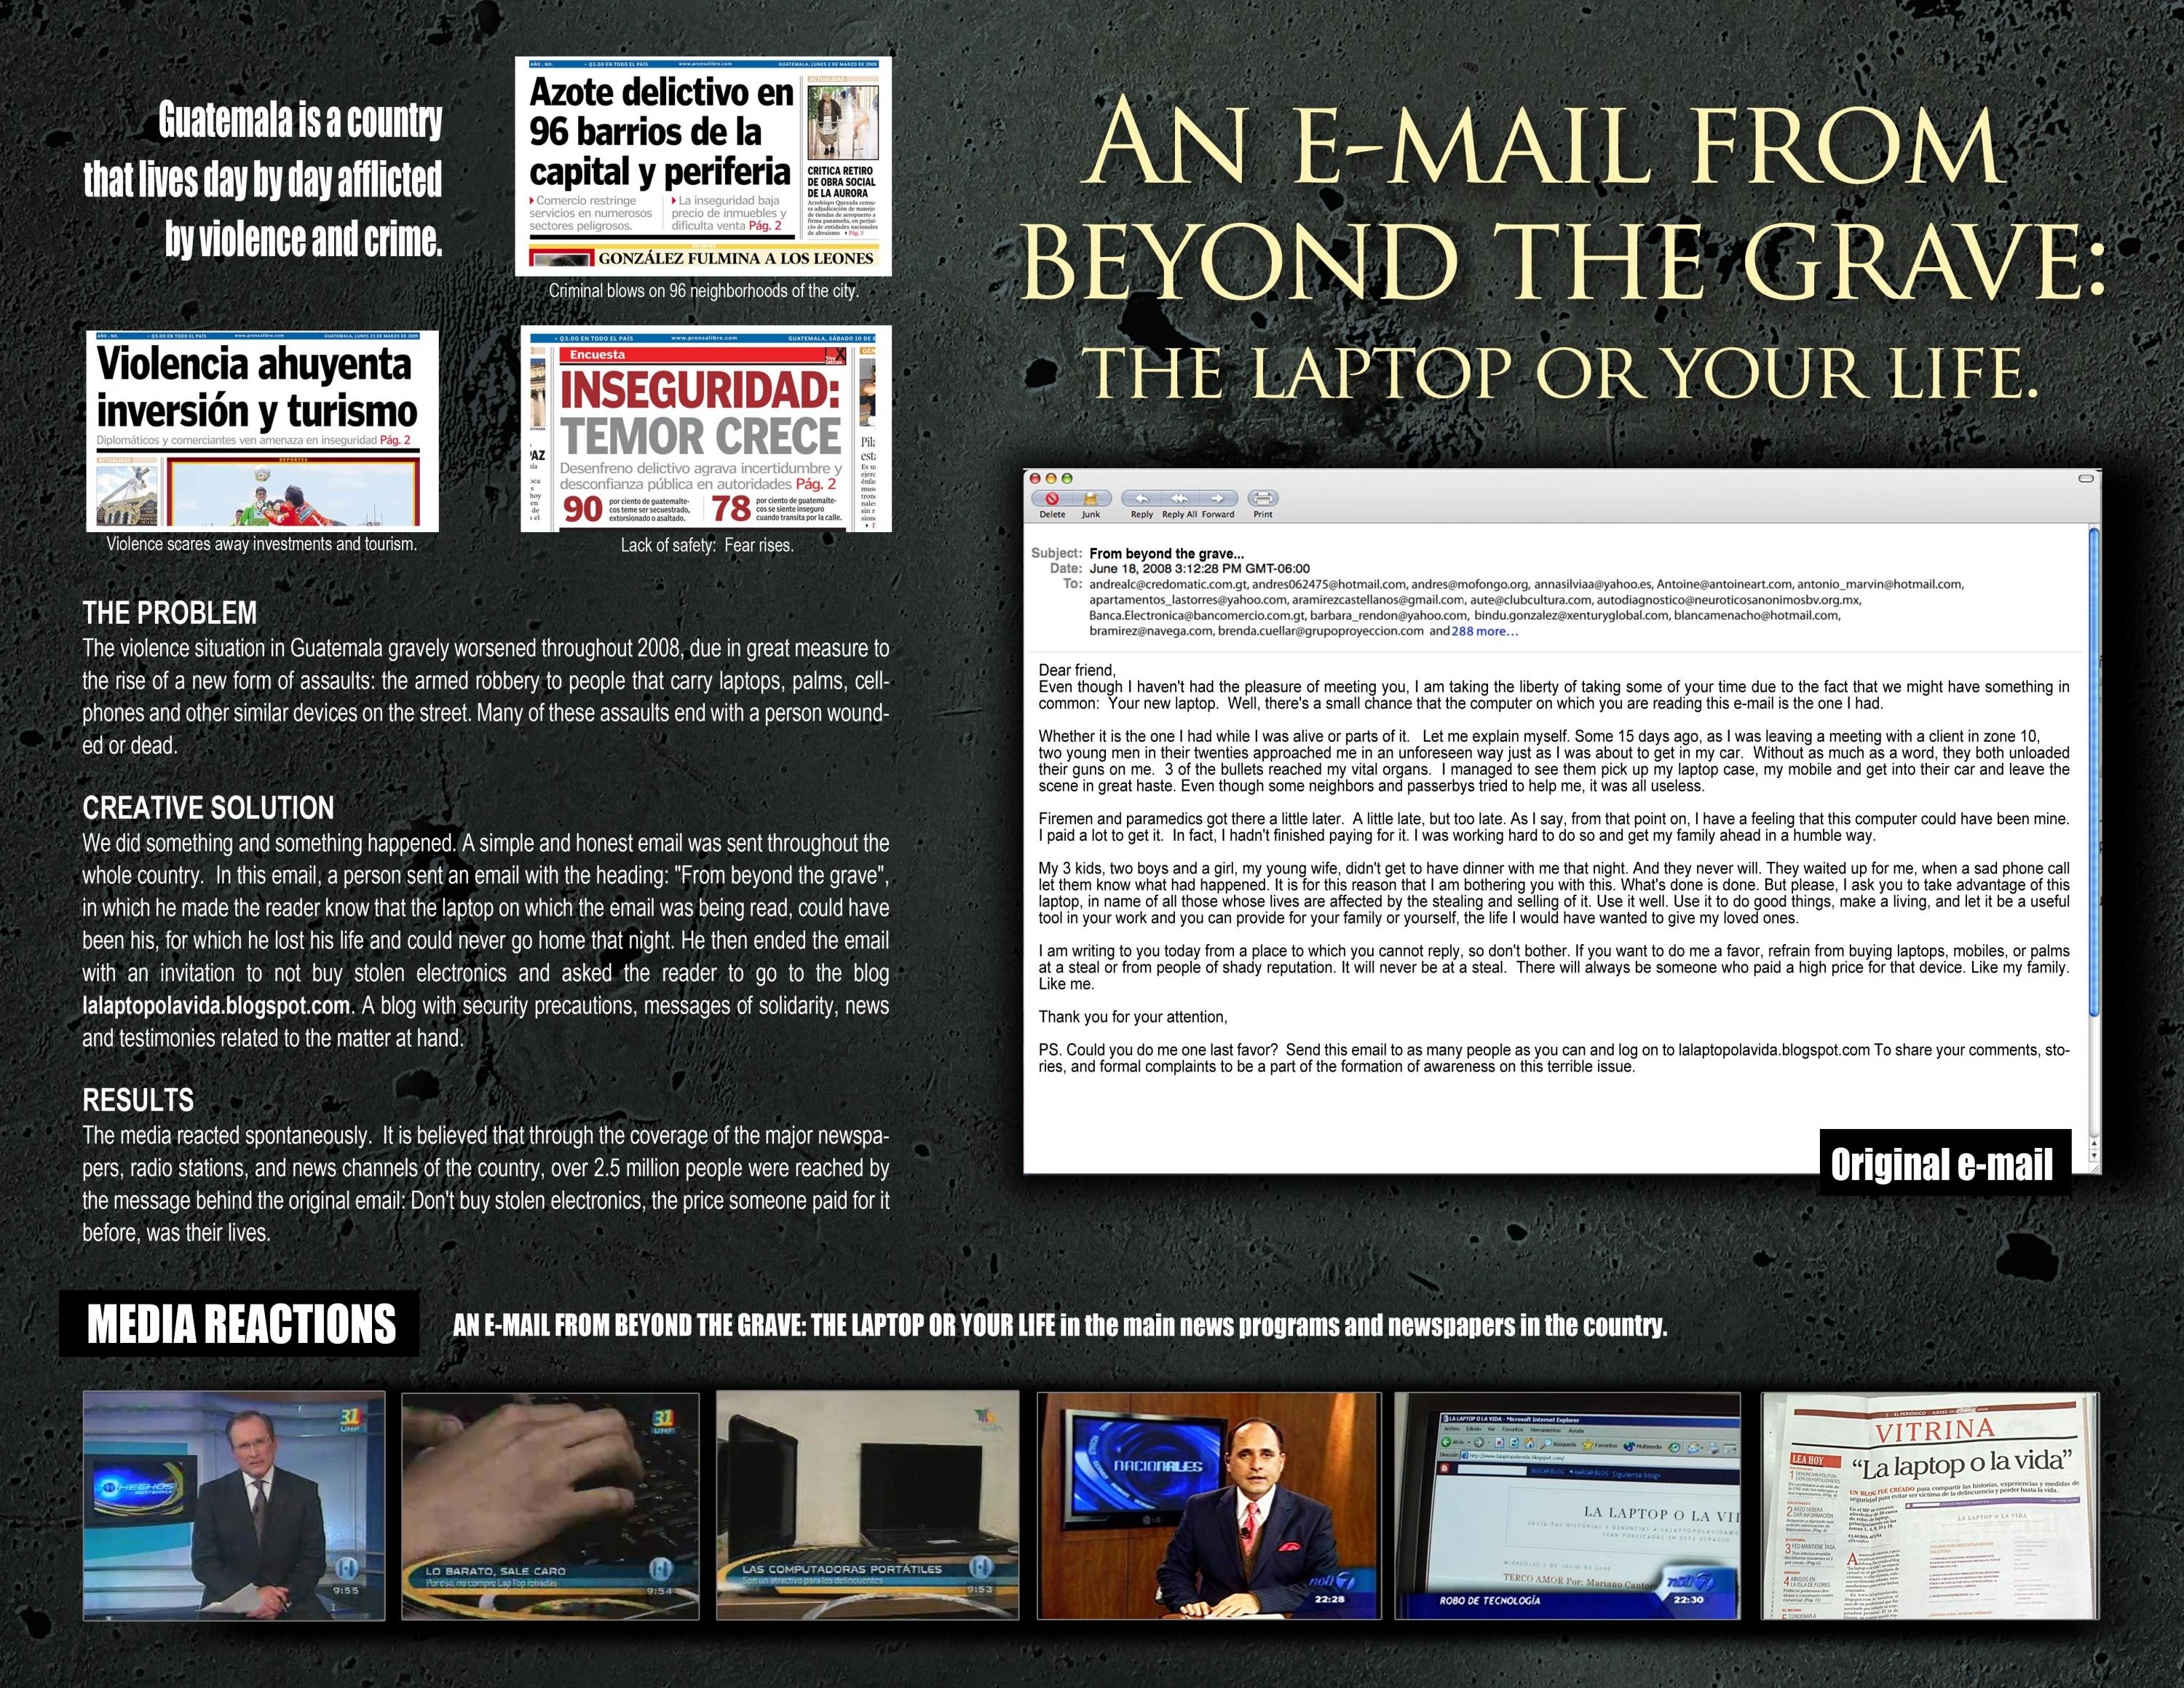 E-MAIL FROM BEYOND THE GRAVE